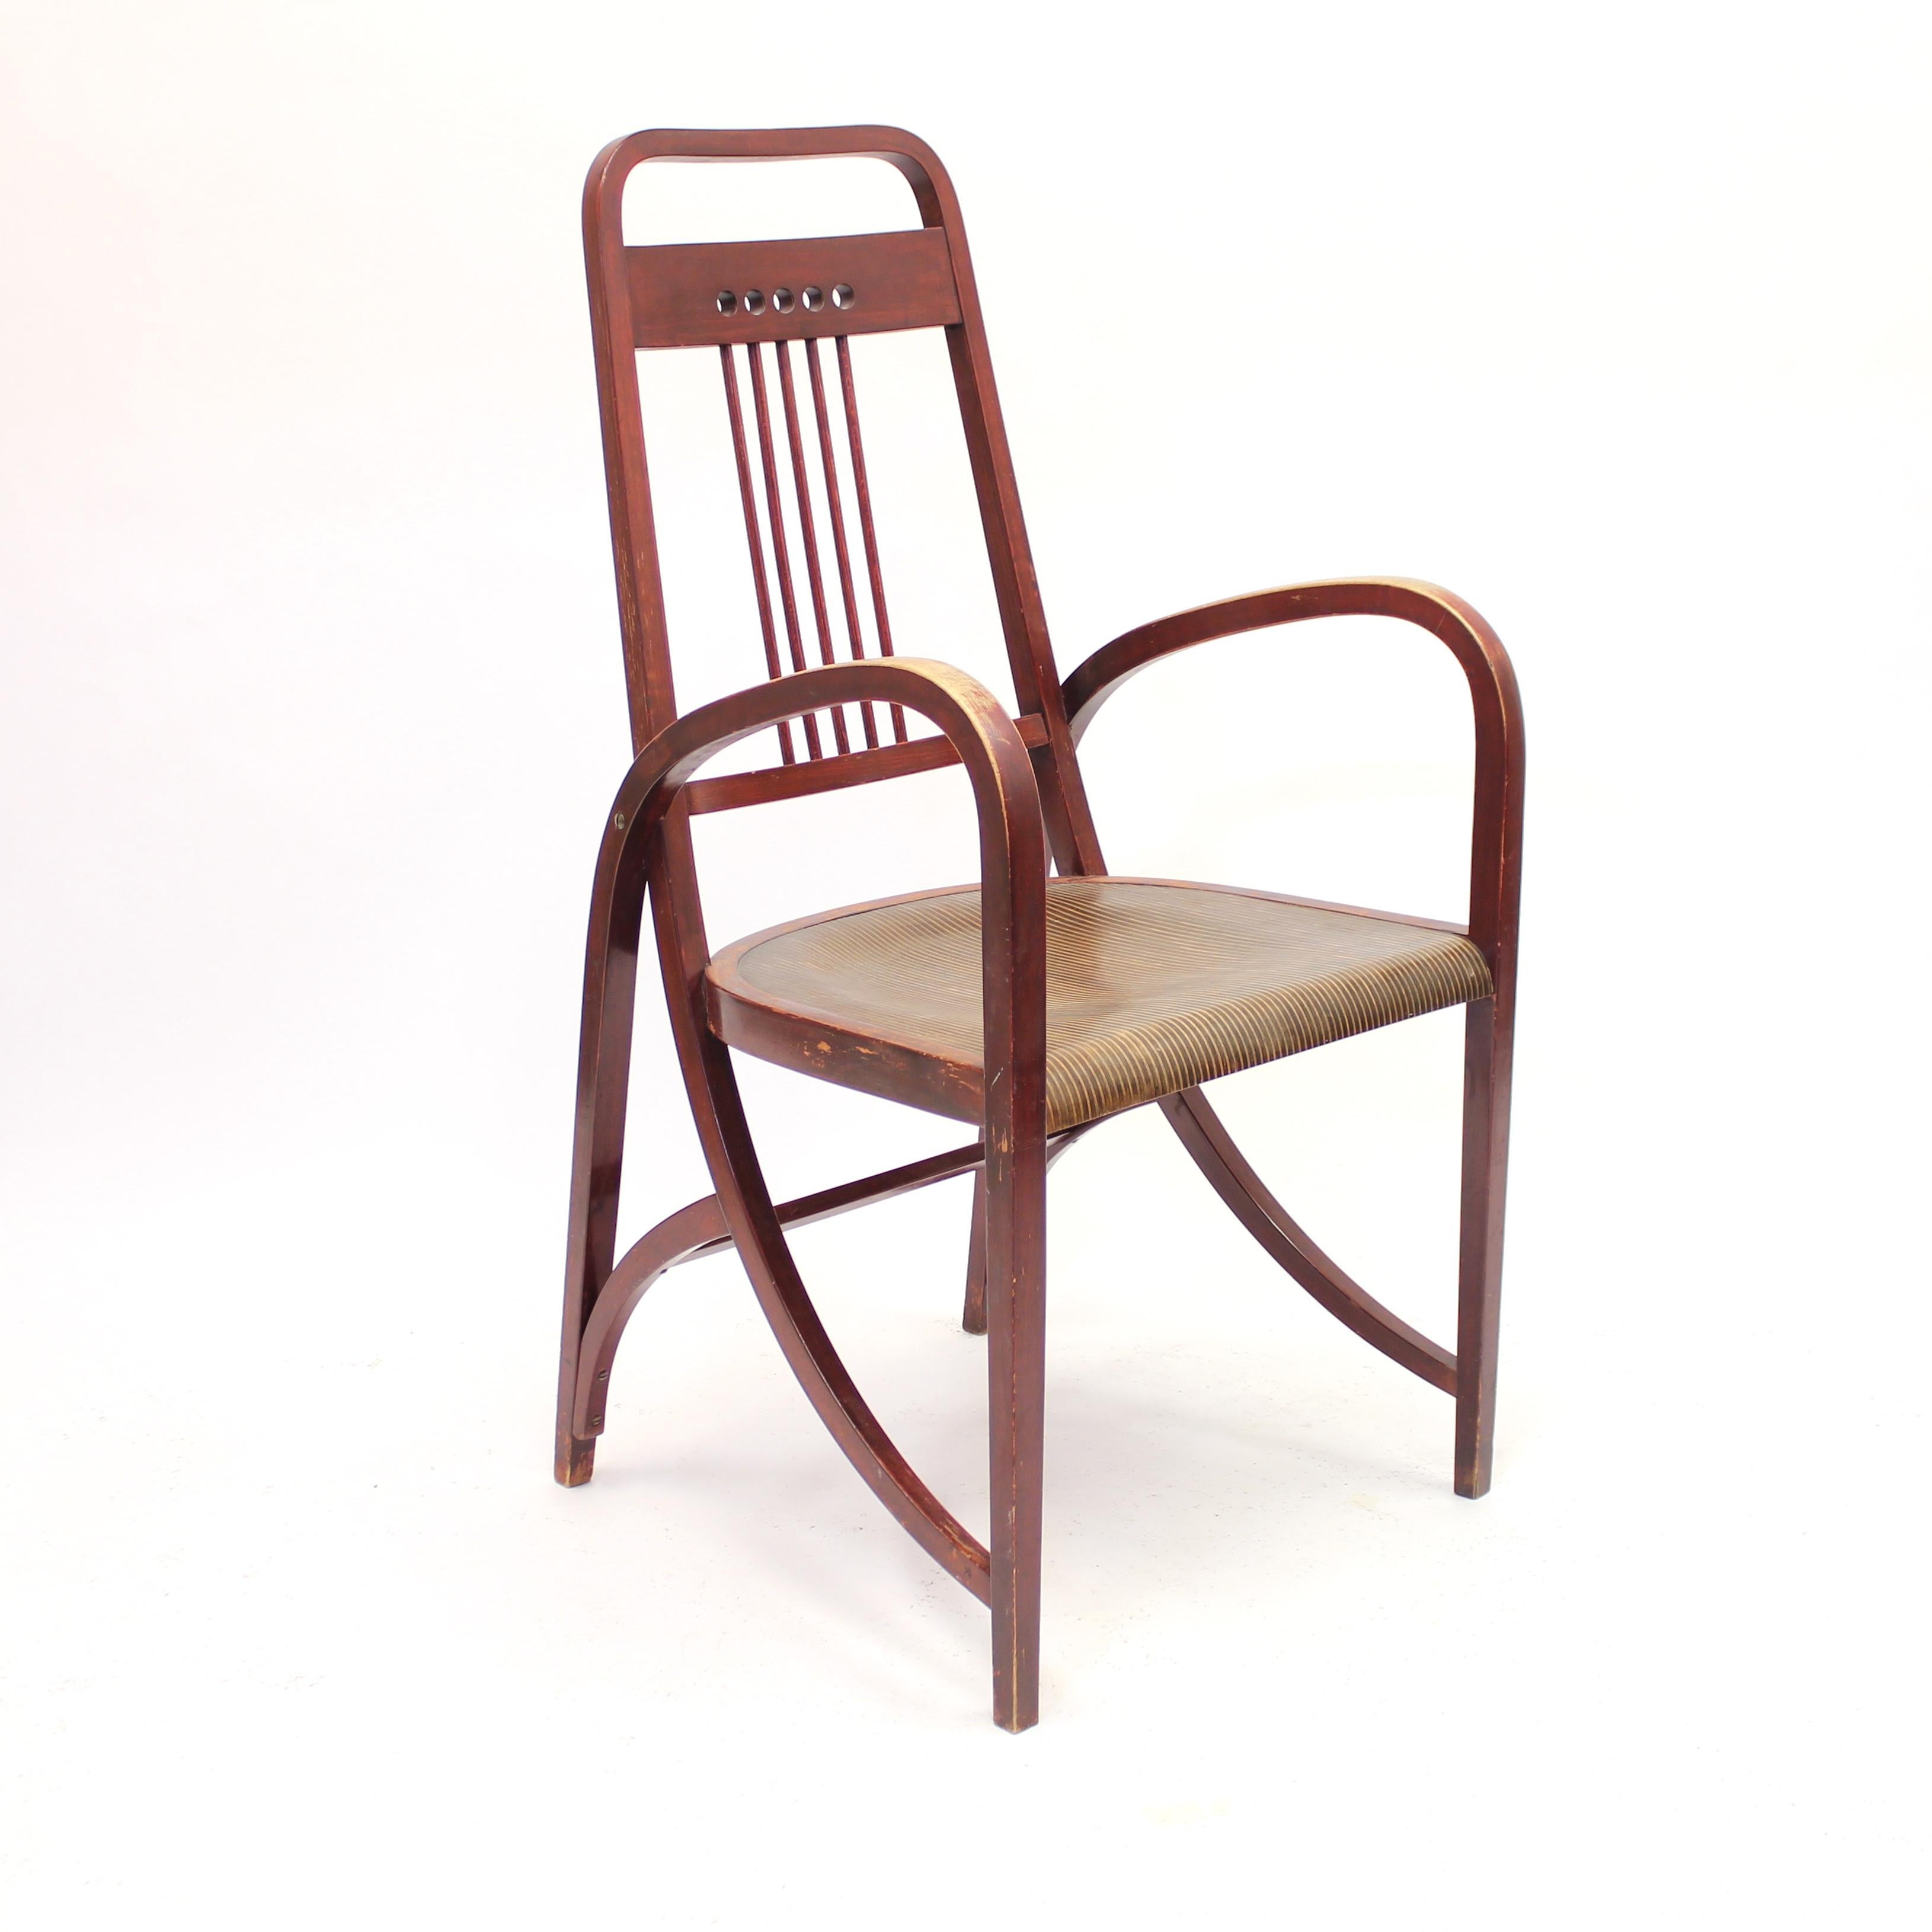 Rare Thonet arm chair, model 511, from around 1904. This model was a part of the Thonet catalog in 1904 so it was designed and produced around that period. The model has no known designer but it's very clear that it took a lot of inspiration from